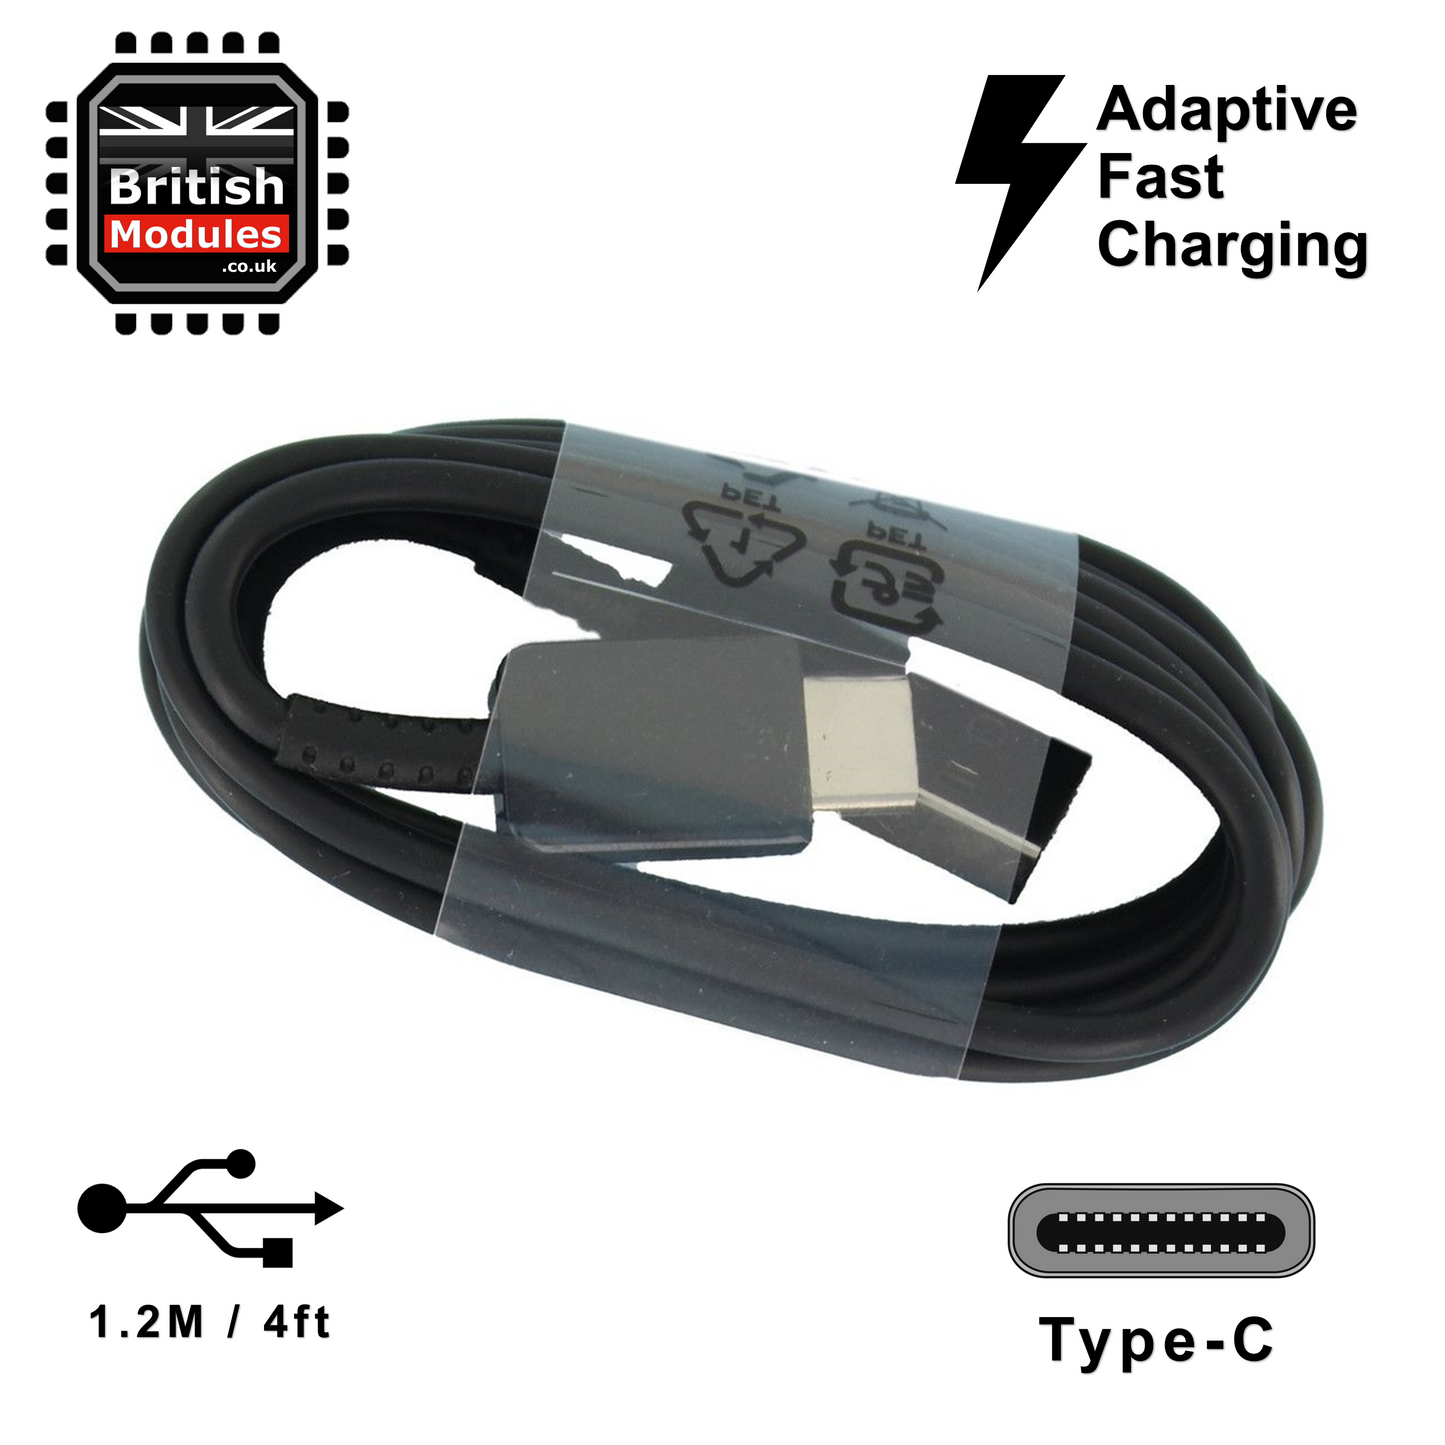 Samsung Dual Port USB Adaptive Fast Charging Car Charger with Type-C Cable